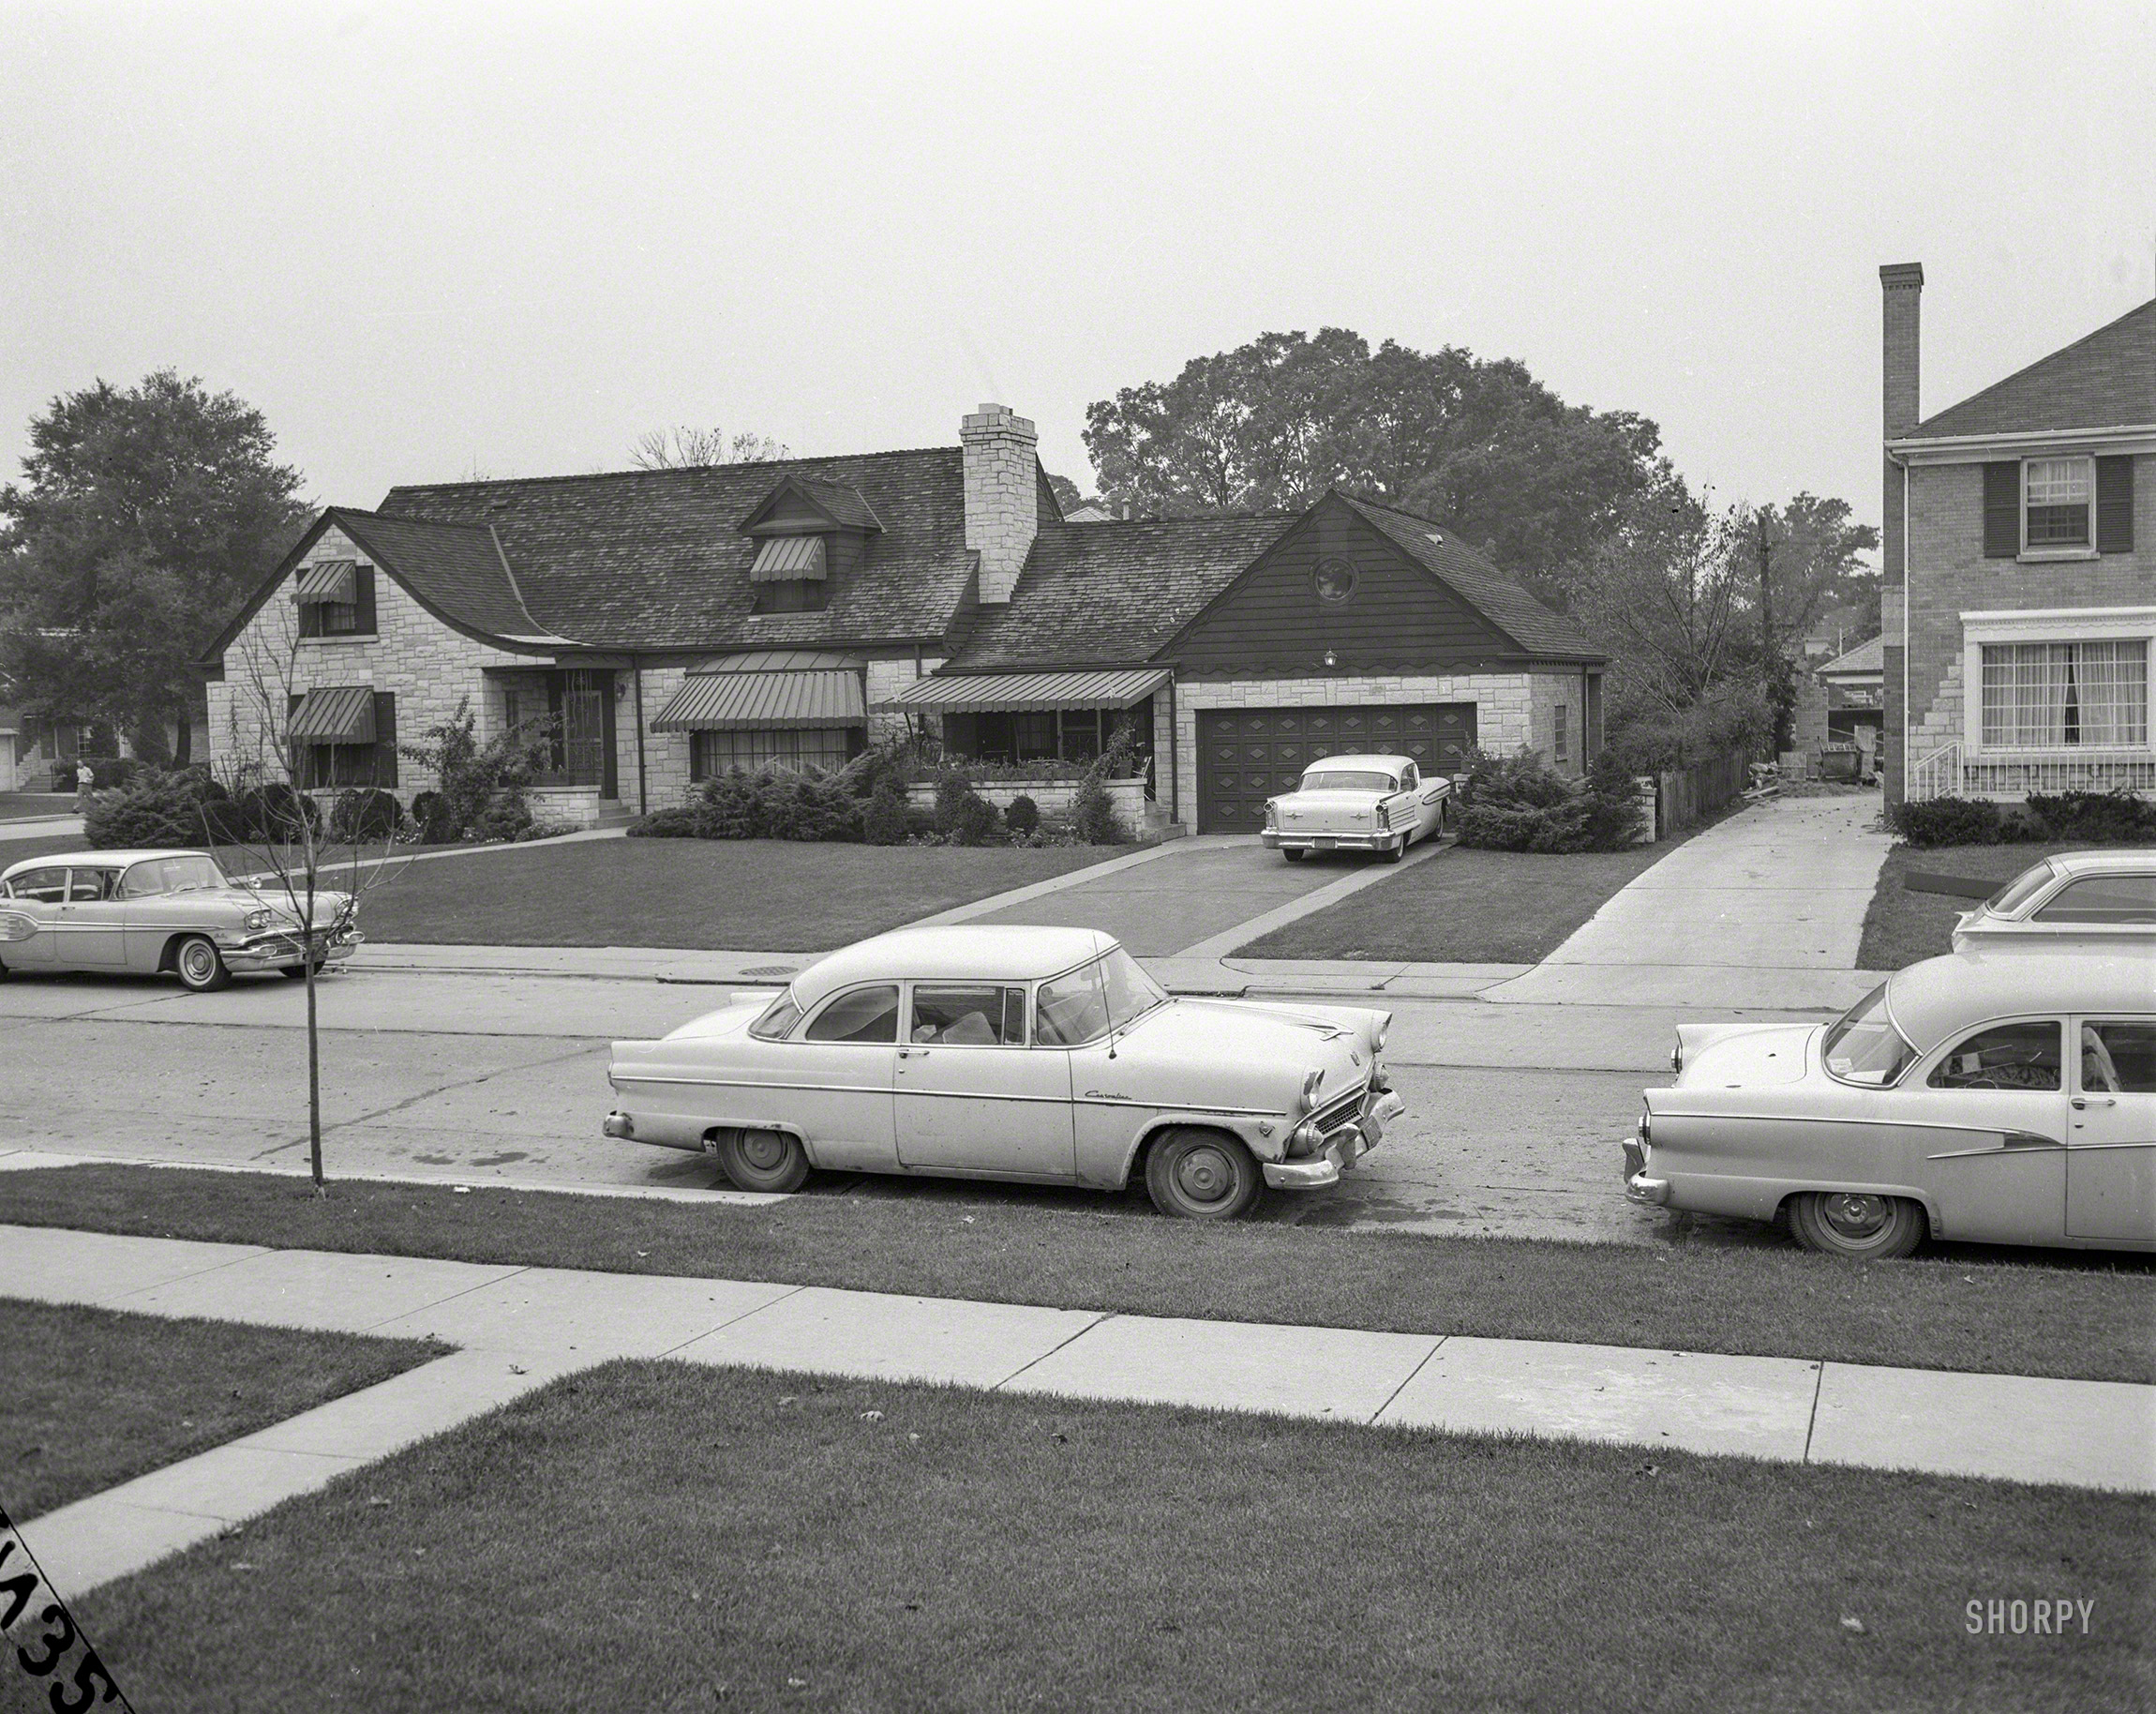 "Two-car families." Columbus, Georgia, circa 1960. Three Fords, an Oldsmobile and a Pontiac. 4x5 acetate negative from the News Archive. View full size.